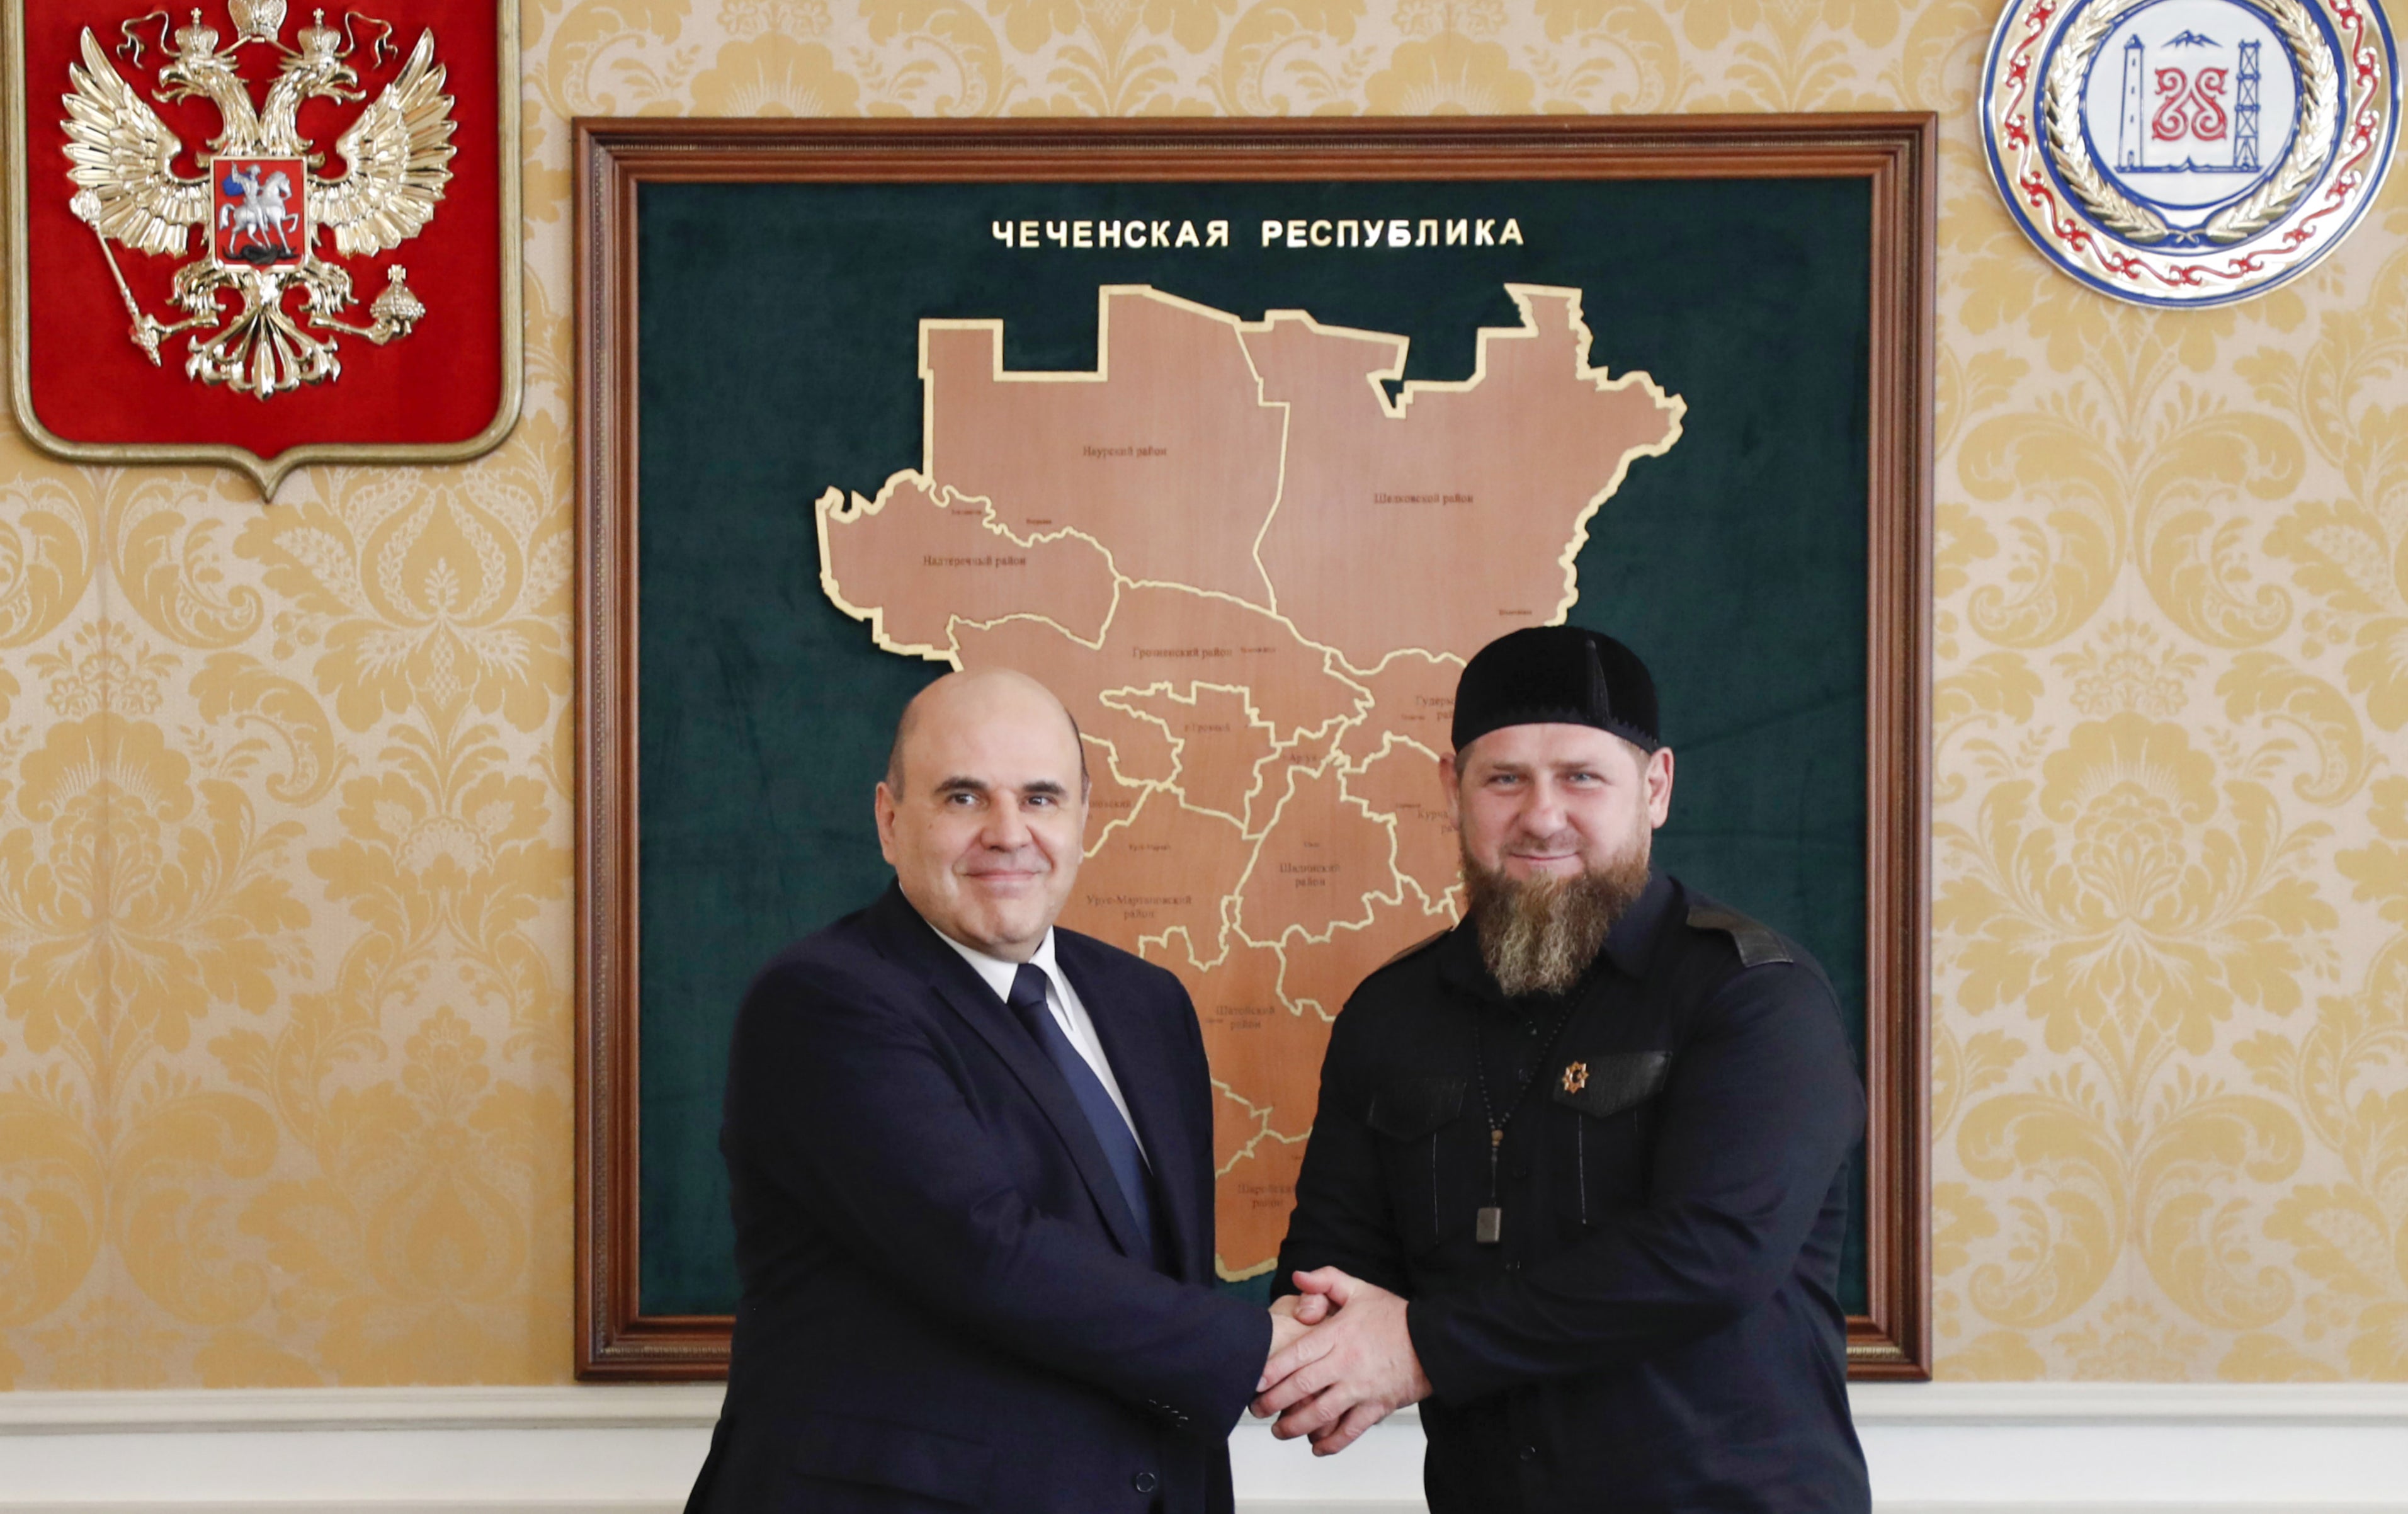 The Russian prime minister, Mikhail Mishustin, and Kadyrov shake hands during their meeting in Grozny, 23 April 2021